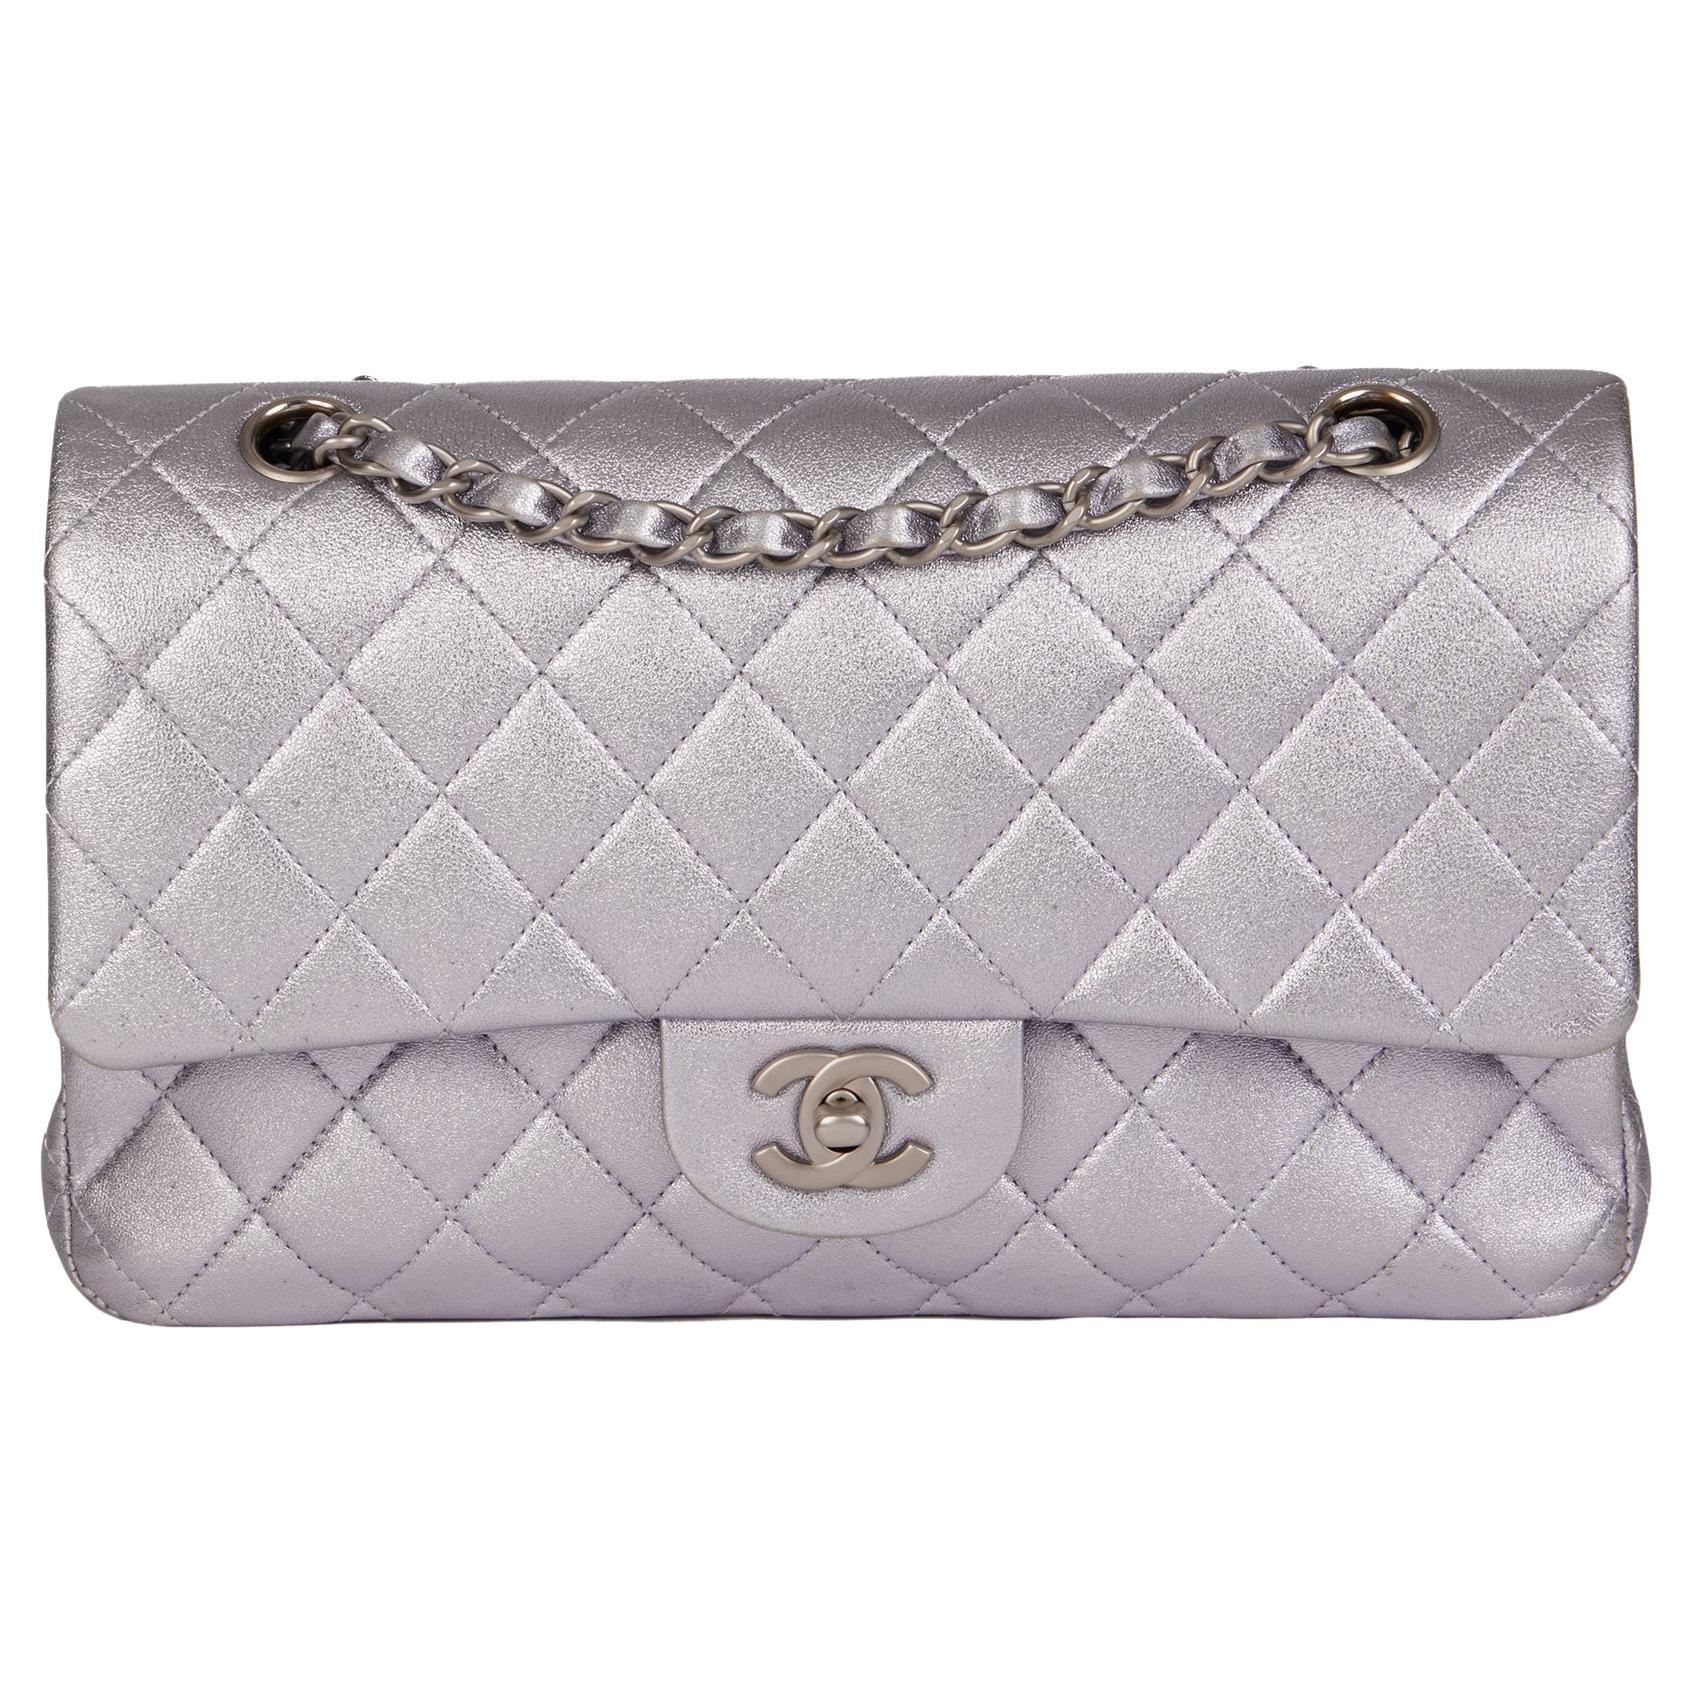 CHANEL Pale Purple Quilted Metallic Lambskin Medium Classic Double Flap Bag